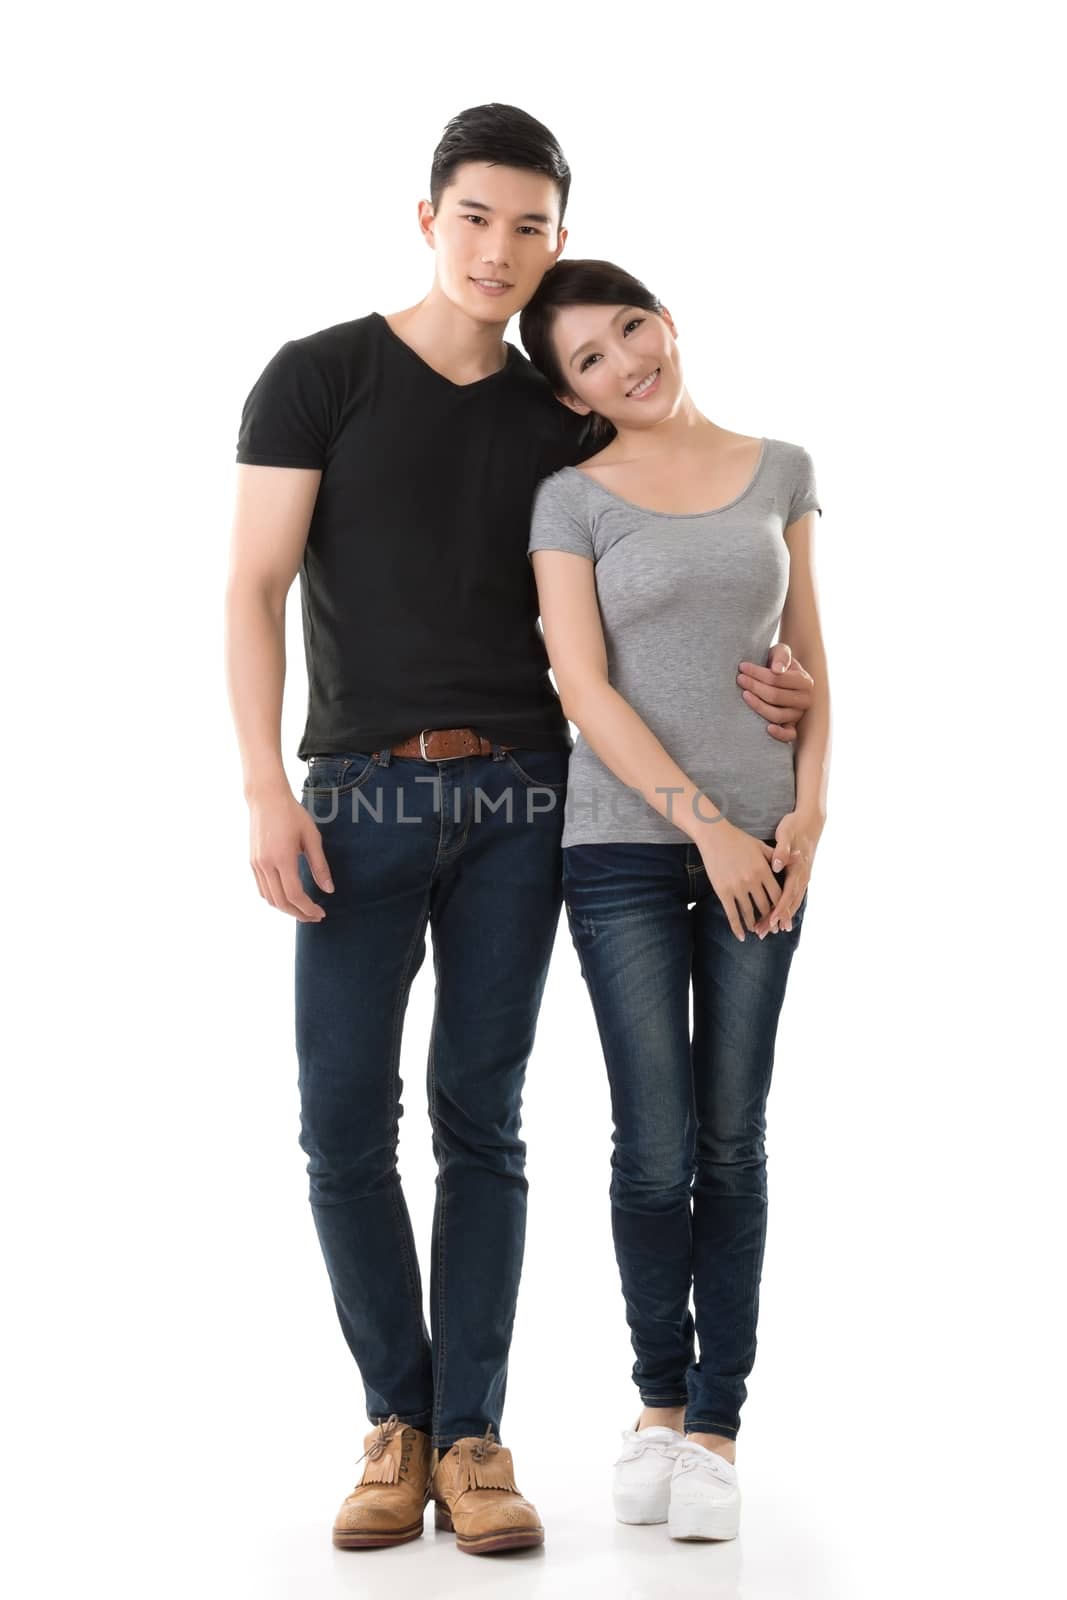 Attractive young Asian couple, full length portrait isolated on white background.